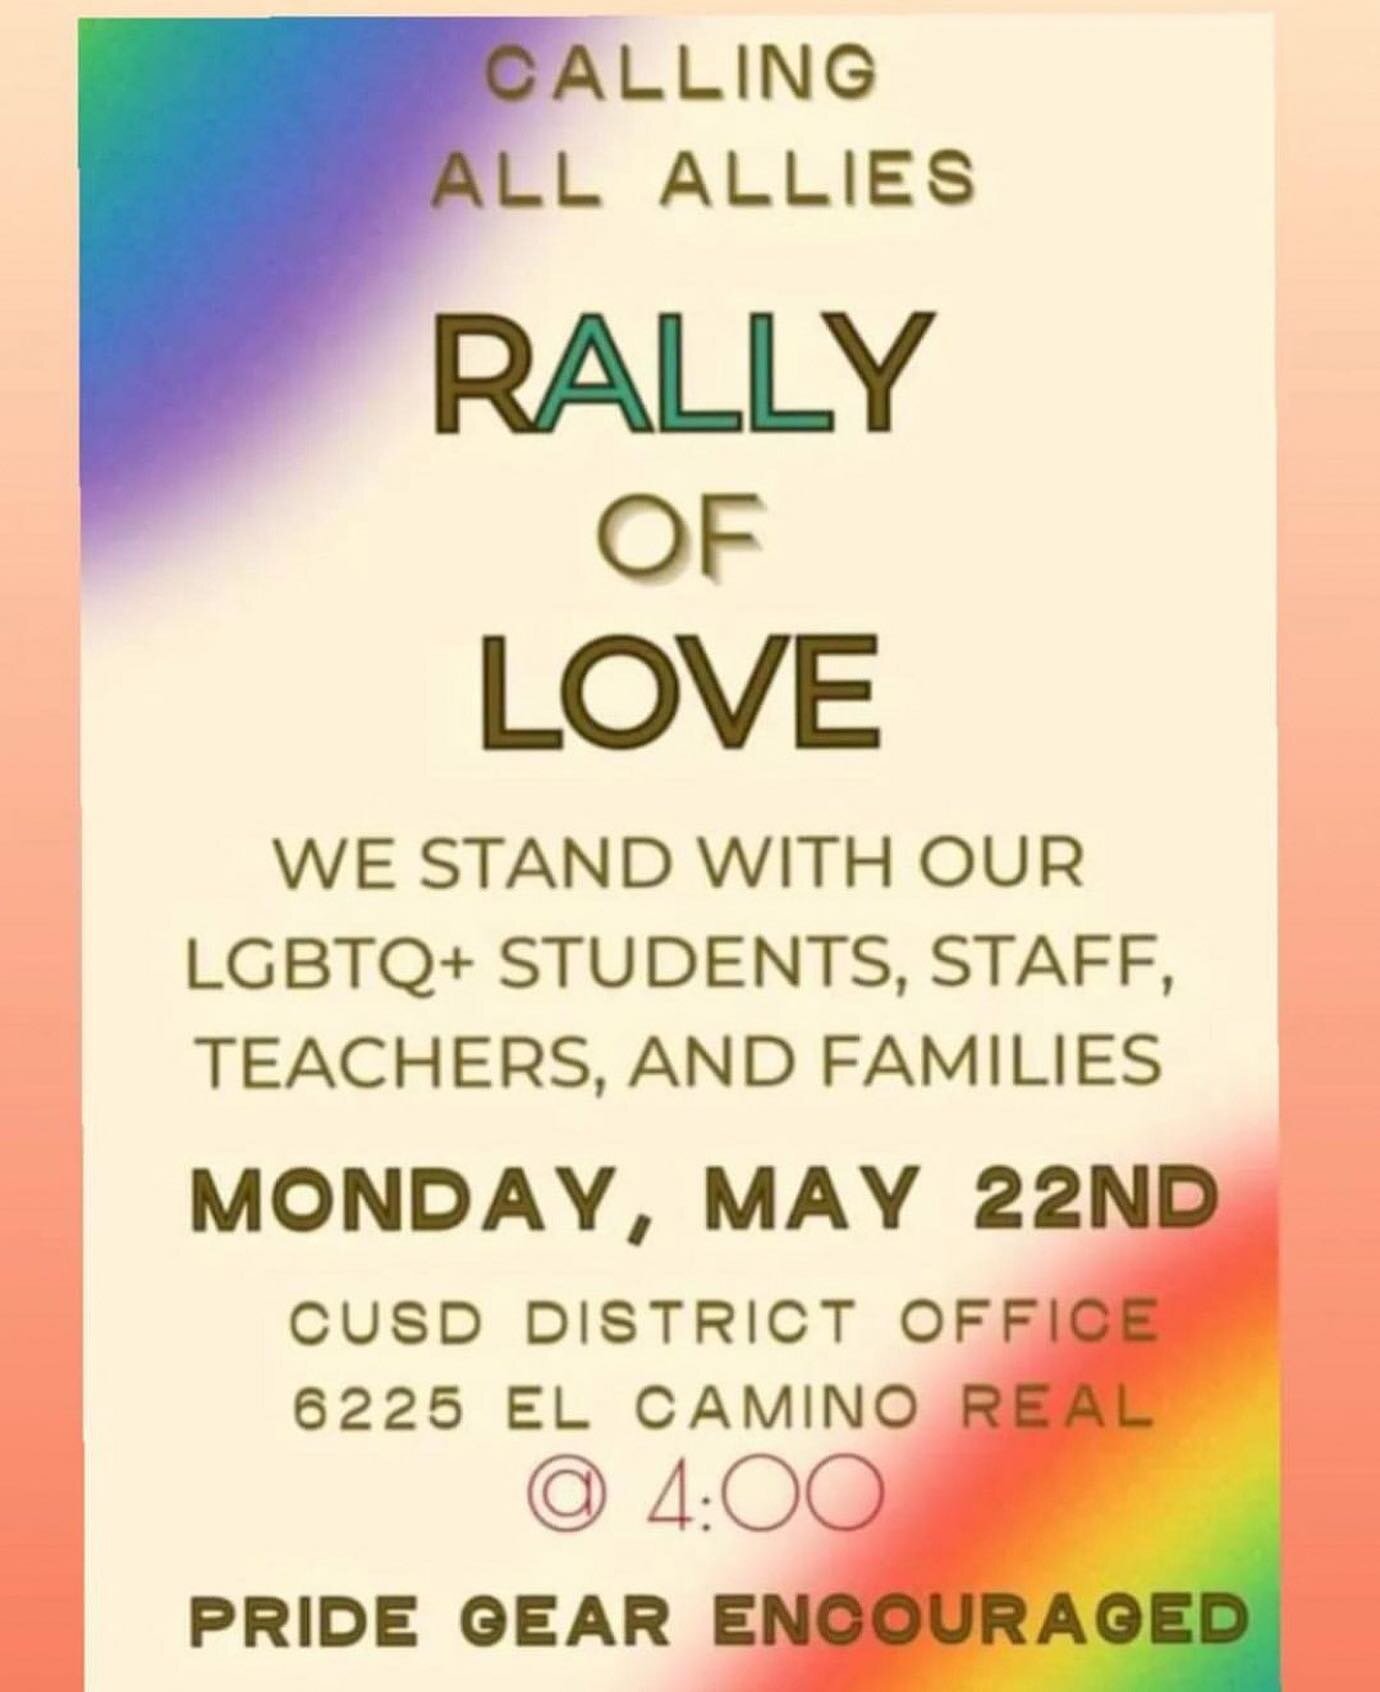 Hey Locals・・・
Recent remarks from a CHS administrator have come to light that undermine our efforts to support LGBTQIA+ students, staff, and families. Please come to show the Carlsbad LGBTQIA+ community you stand with them.